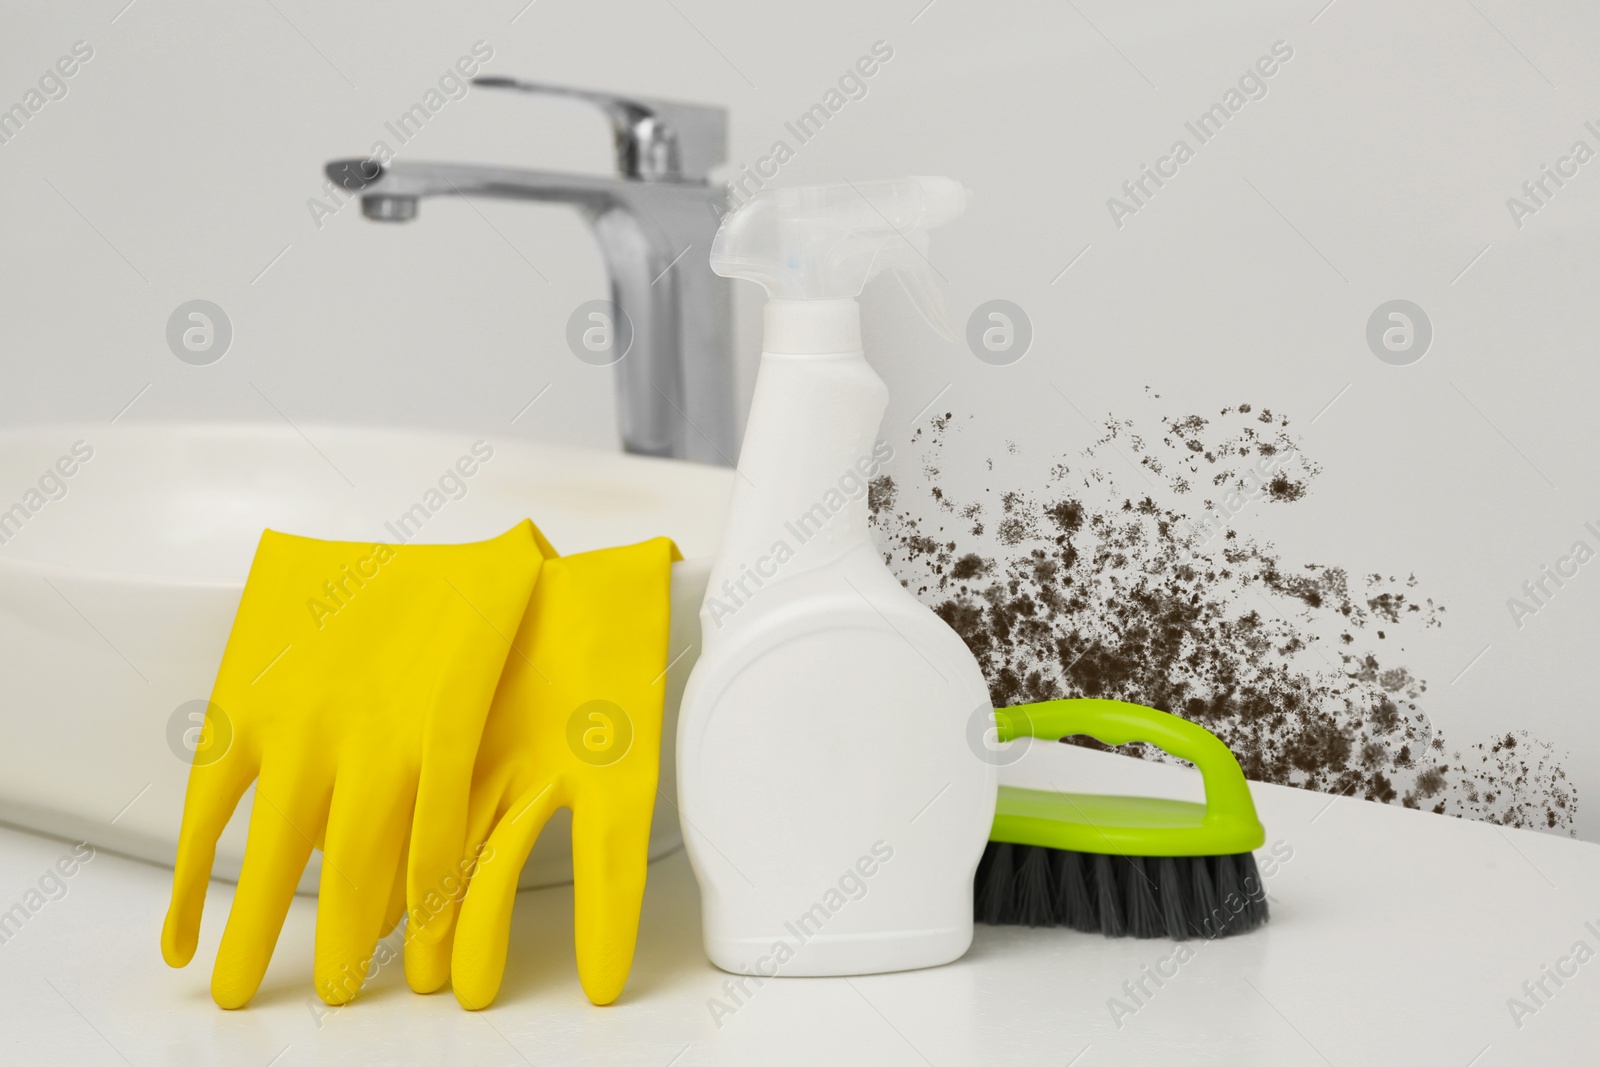 Image of Sink with rubber gloves, mold remover spray bottle and brush near affected wall in bathroom